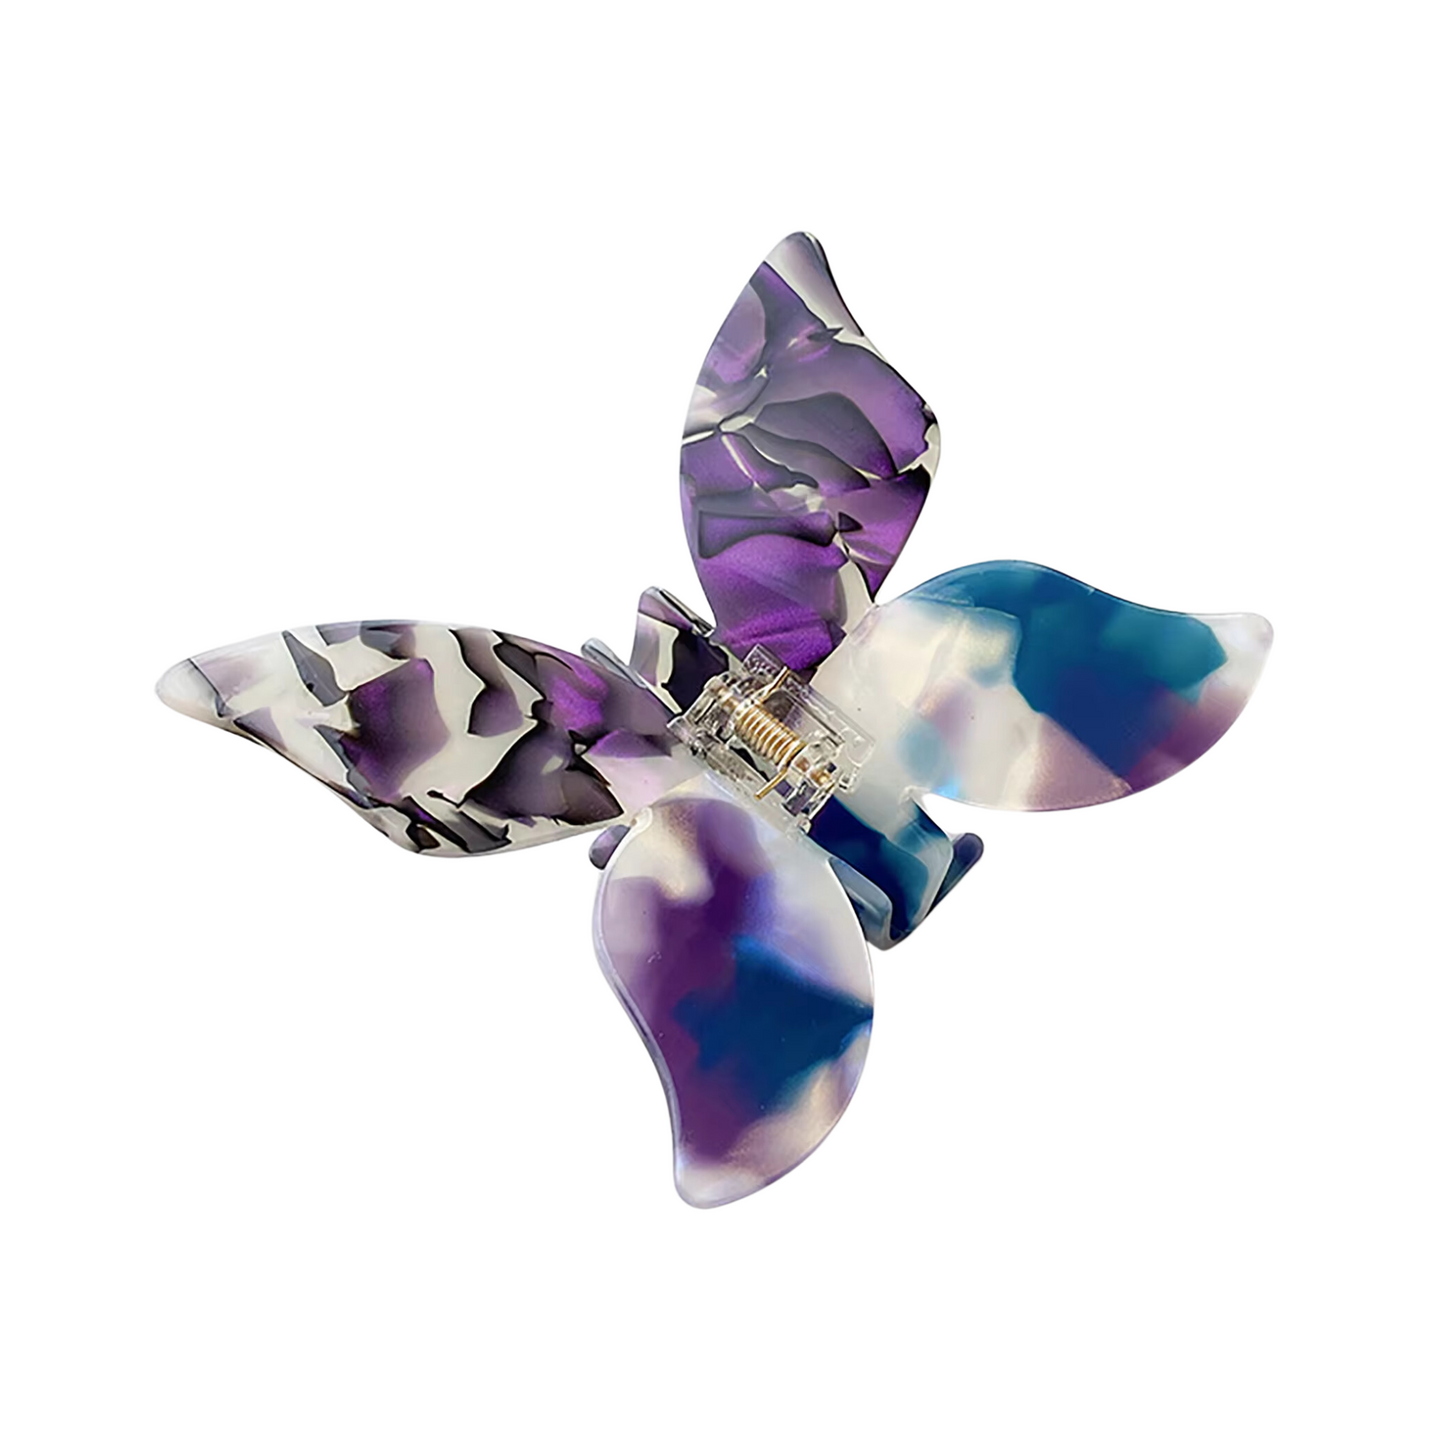 Bella Cellulose Acetate Hair Claw Clips